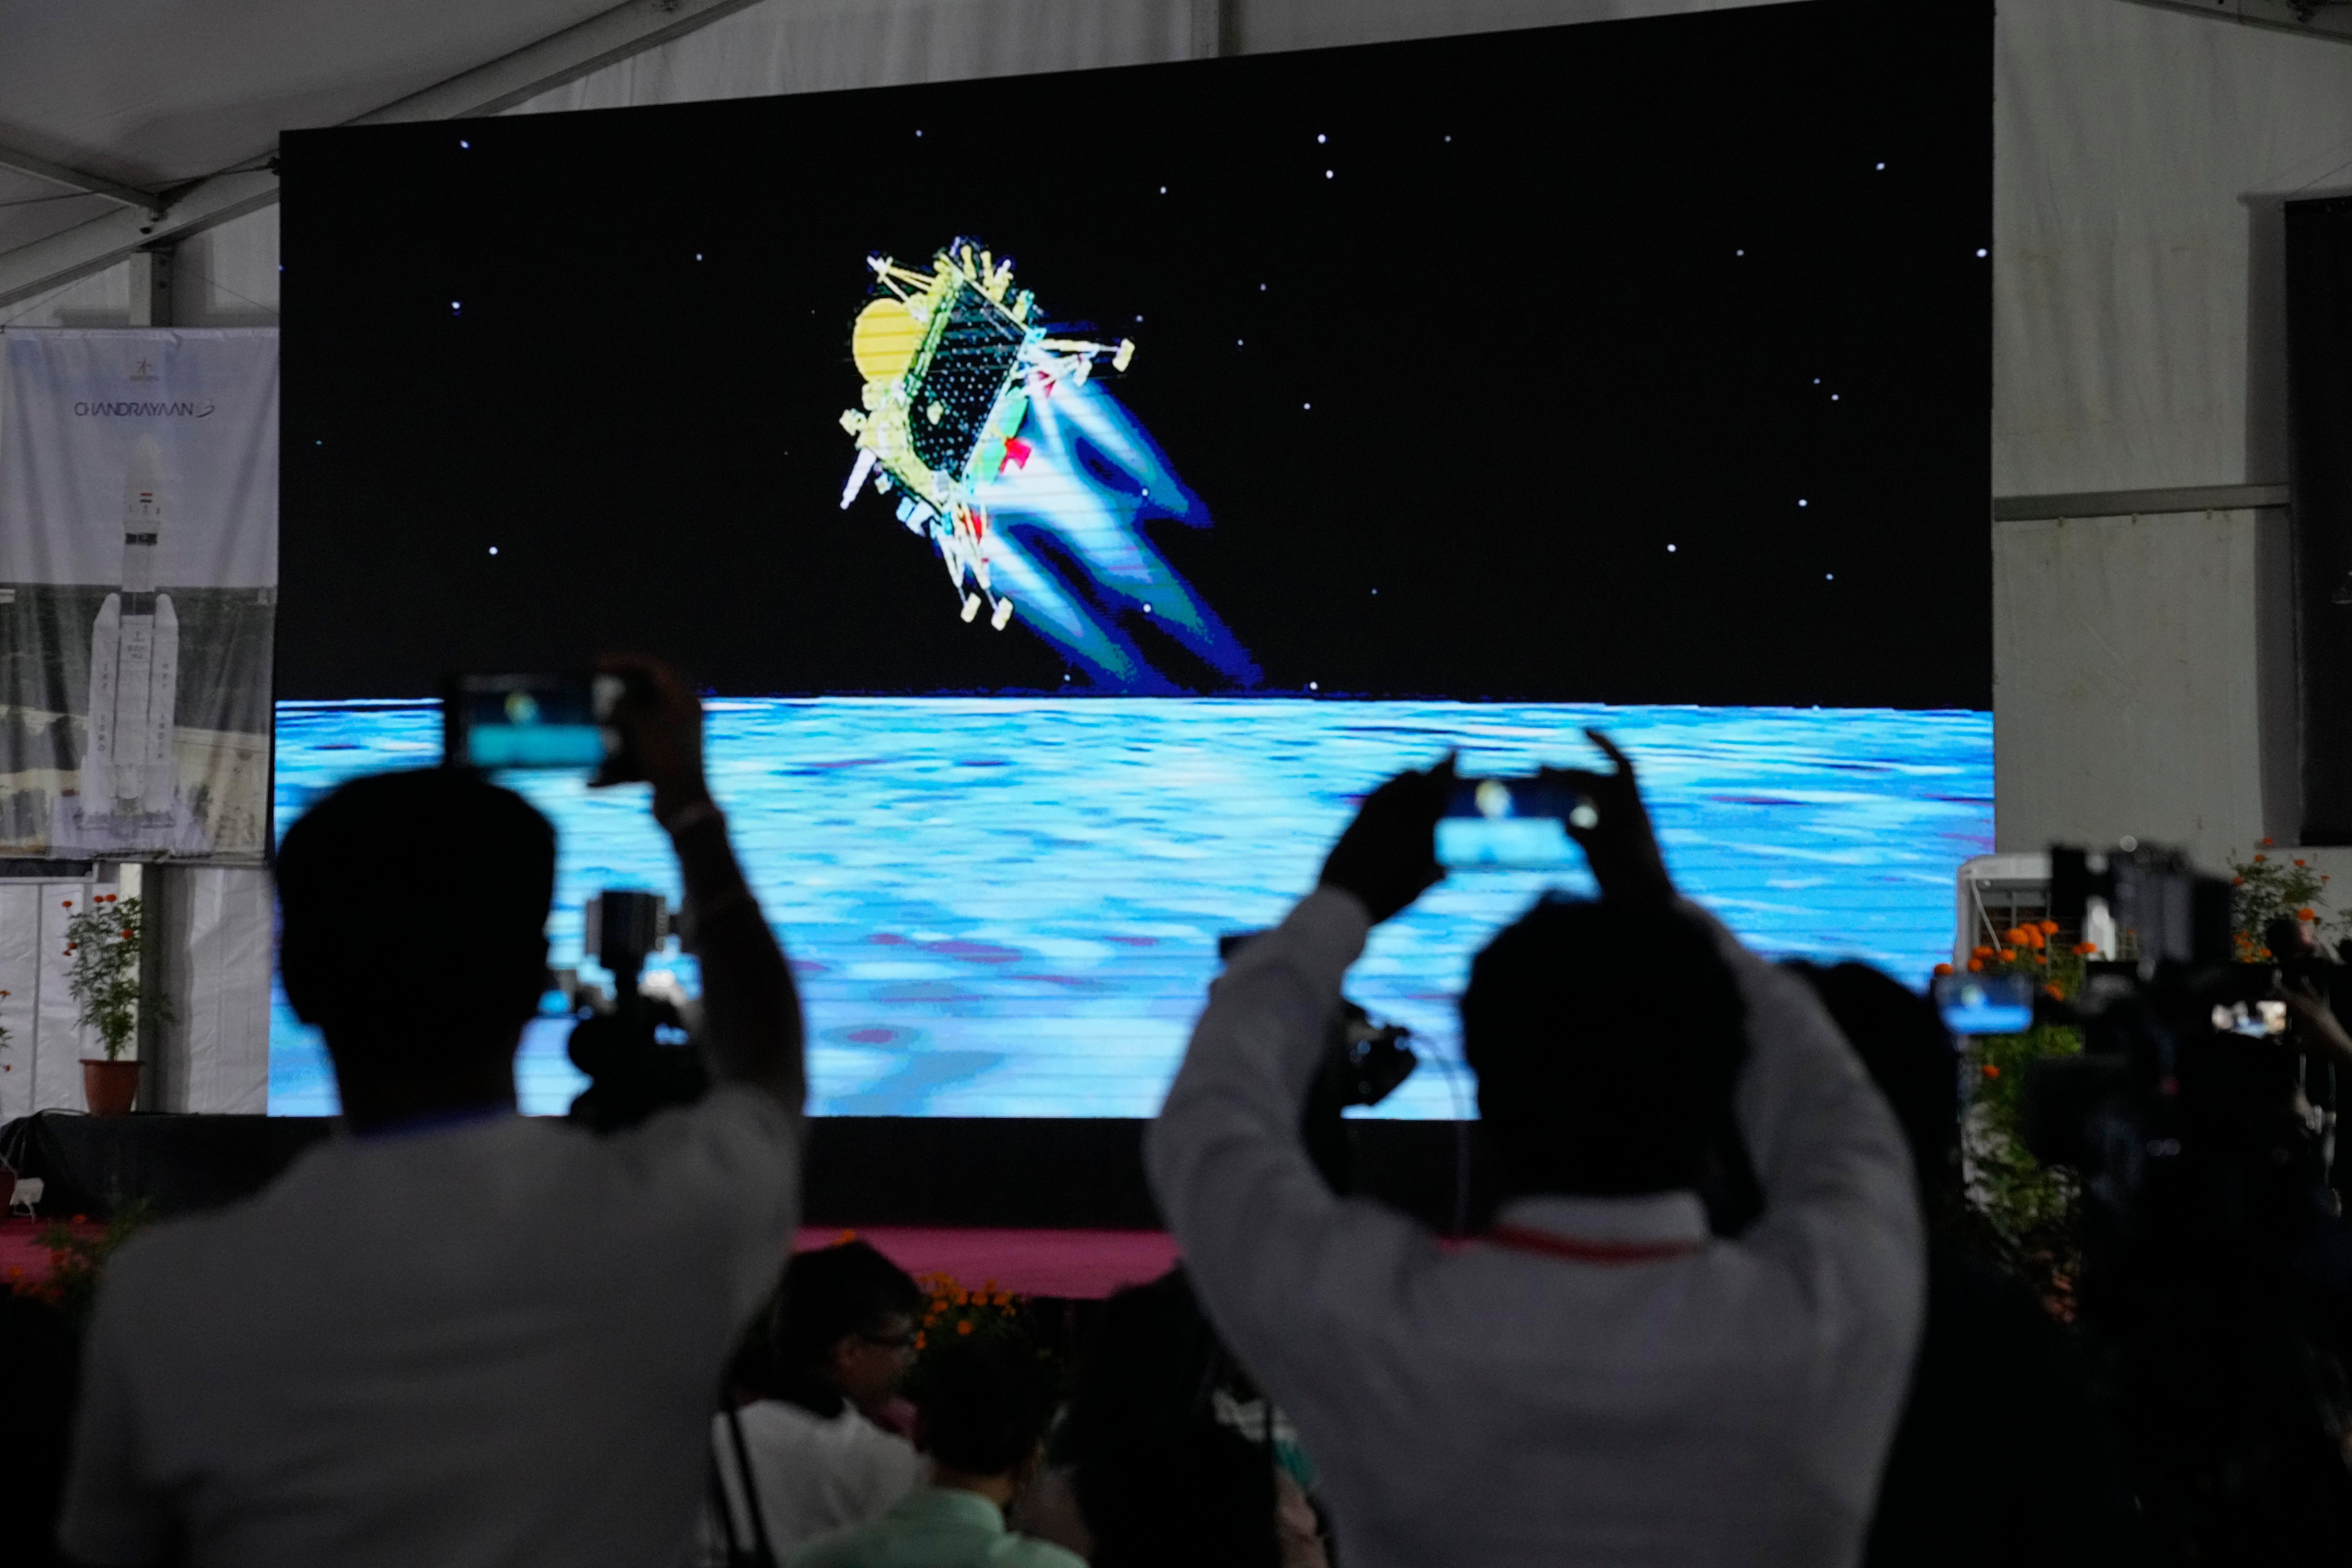 India’s ‘Chandrayaan-3’ has successfully landed on the Moon